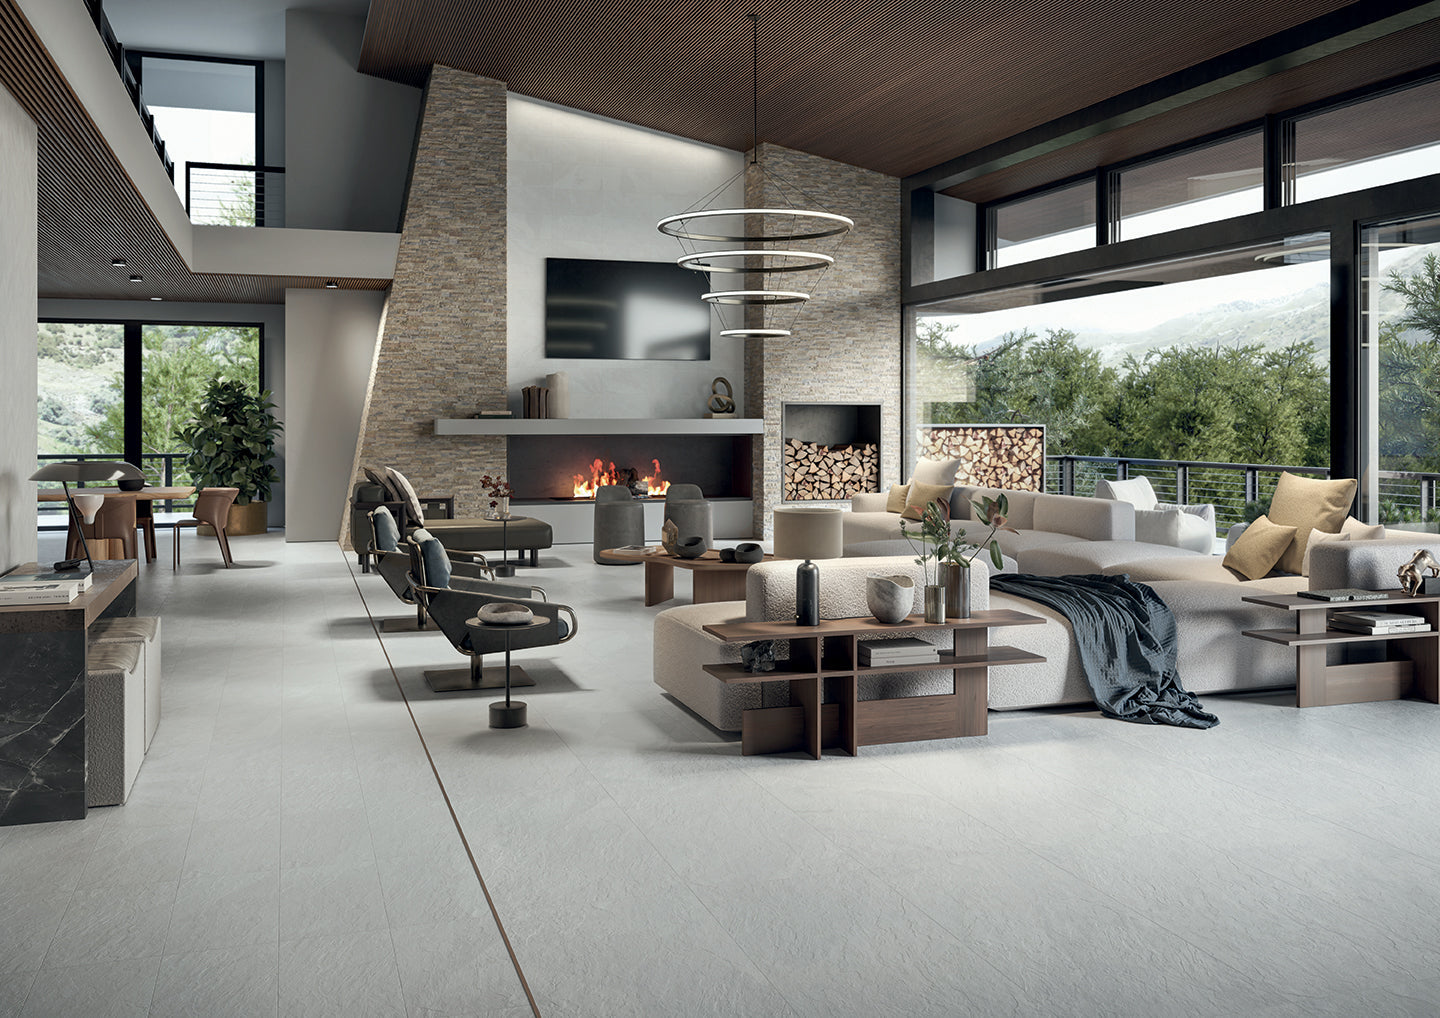 Essence porcelain tile collection in a modern living room setting with fireplace, showcasing various tile patterns and colors by Surface Group.